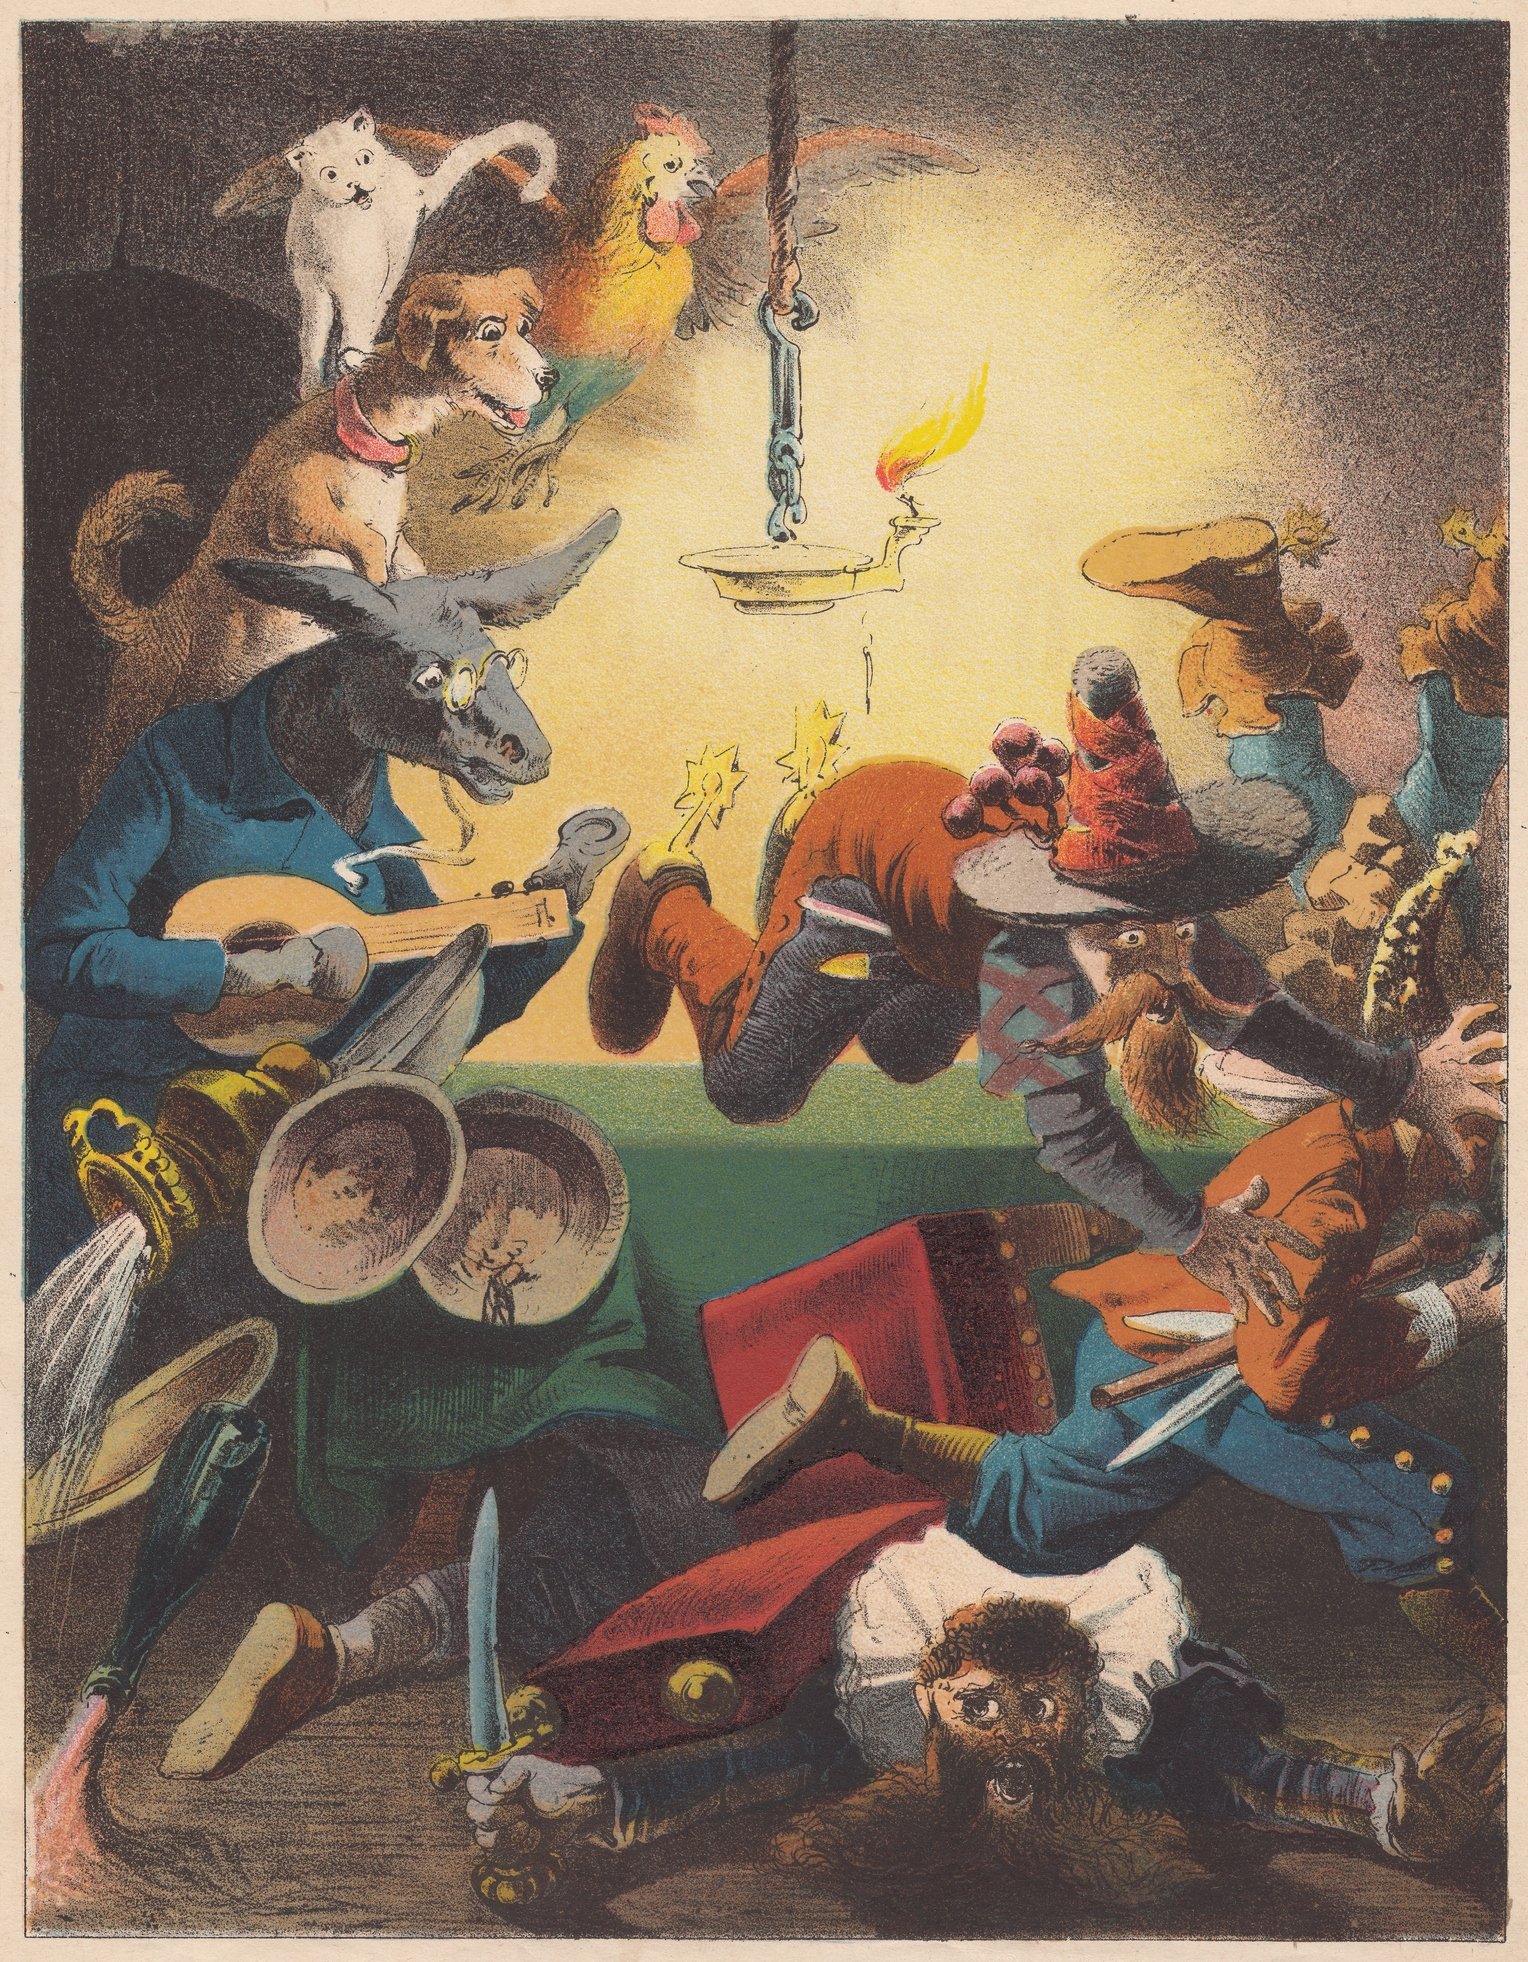 Colour lithograph showing a scene from "The Town Musicians of Bremen" fairy tale by the Brothers Grimm in the “Tales of Children and the Home”, eight stories of which were inspired by “One Thousand and One Nights”. (iStock Photo)